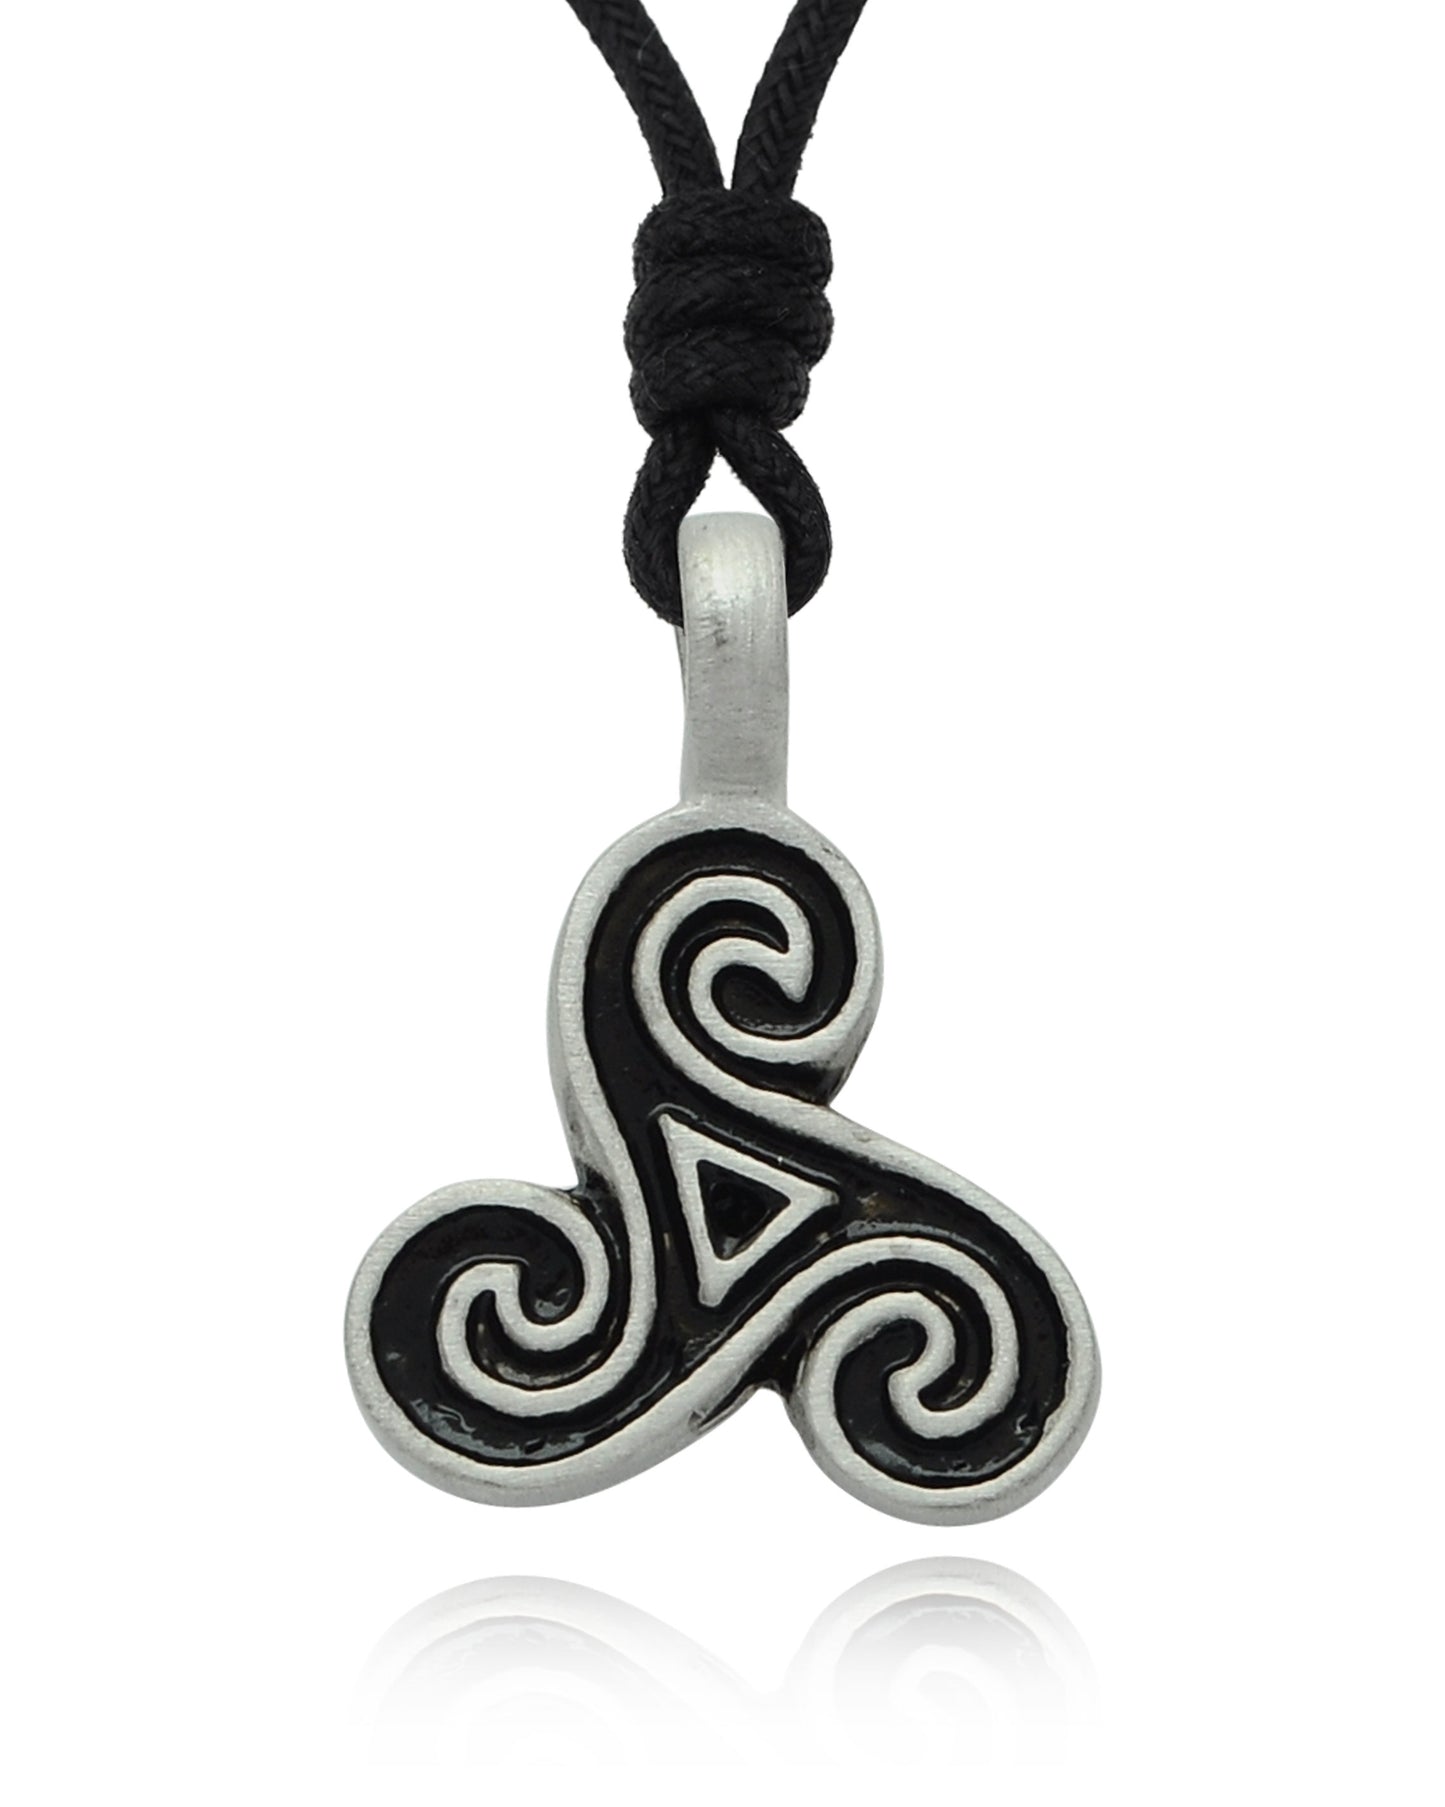 New Tribal Triquetra Silver Pewter Charm Necklace Pendant Jewelry